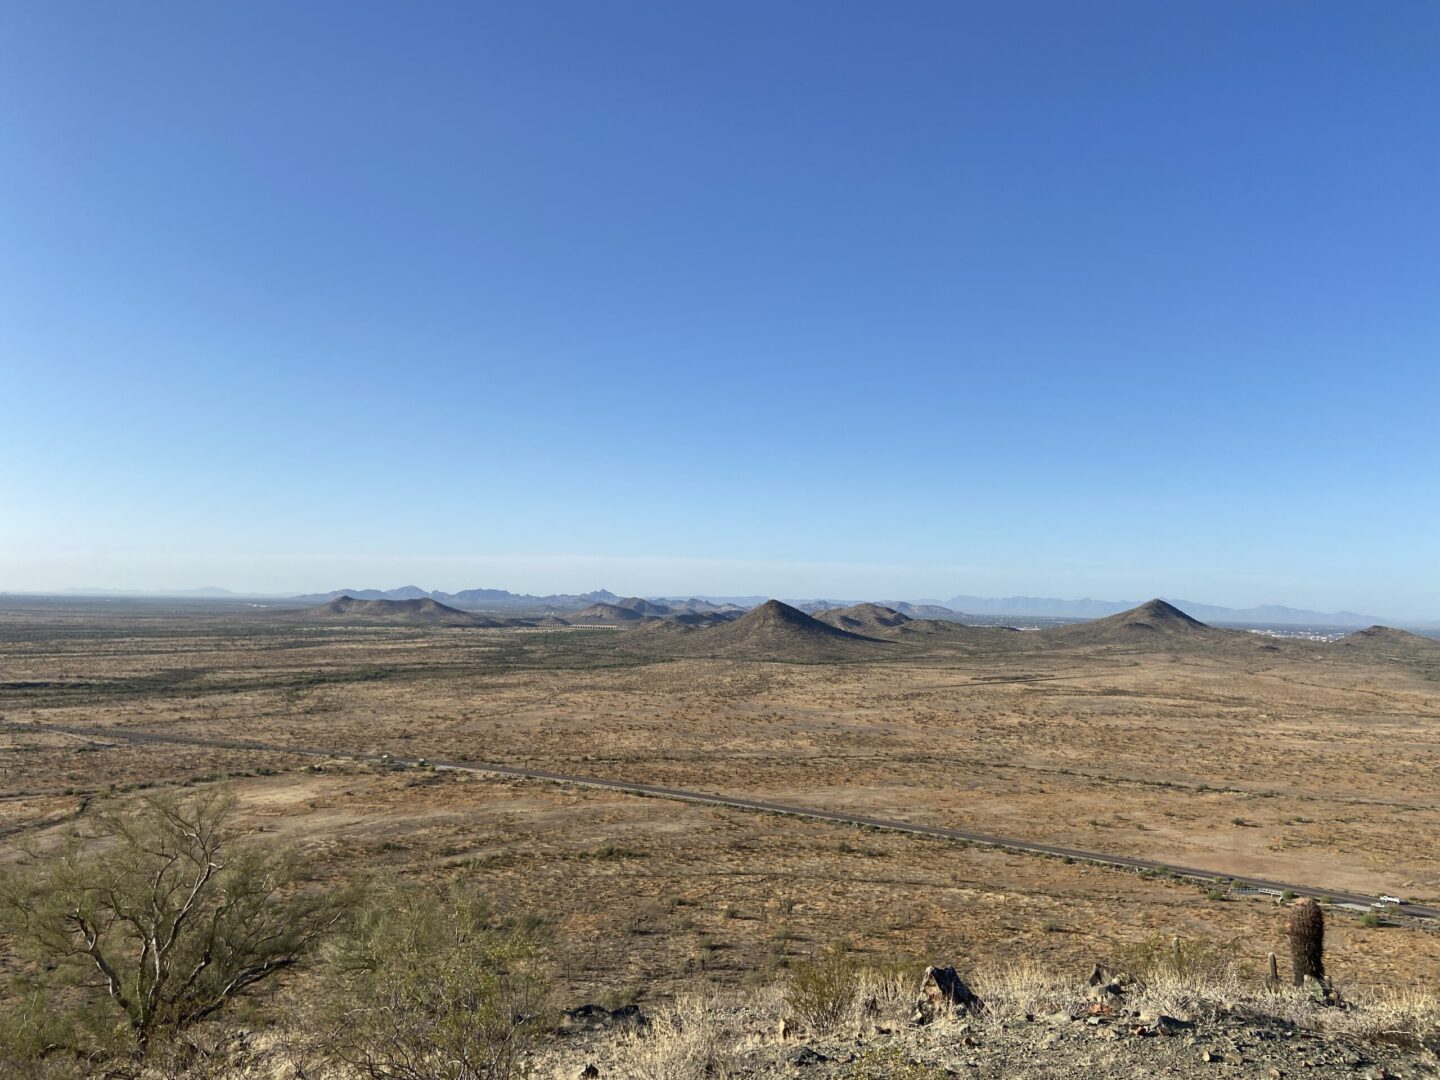 A view of the desert from afar.